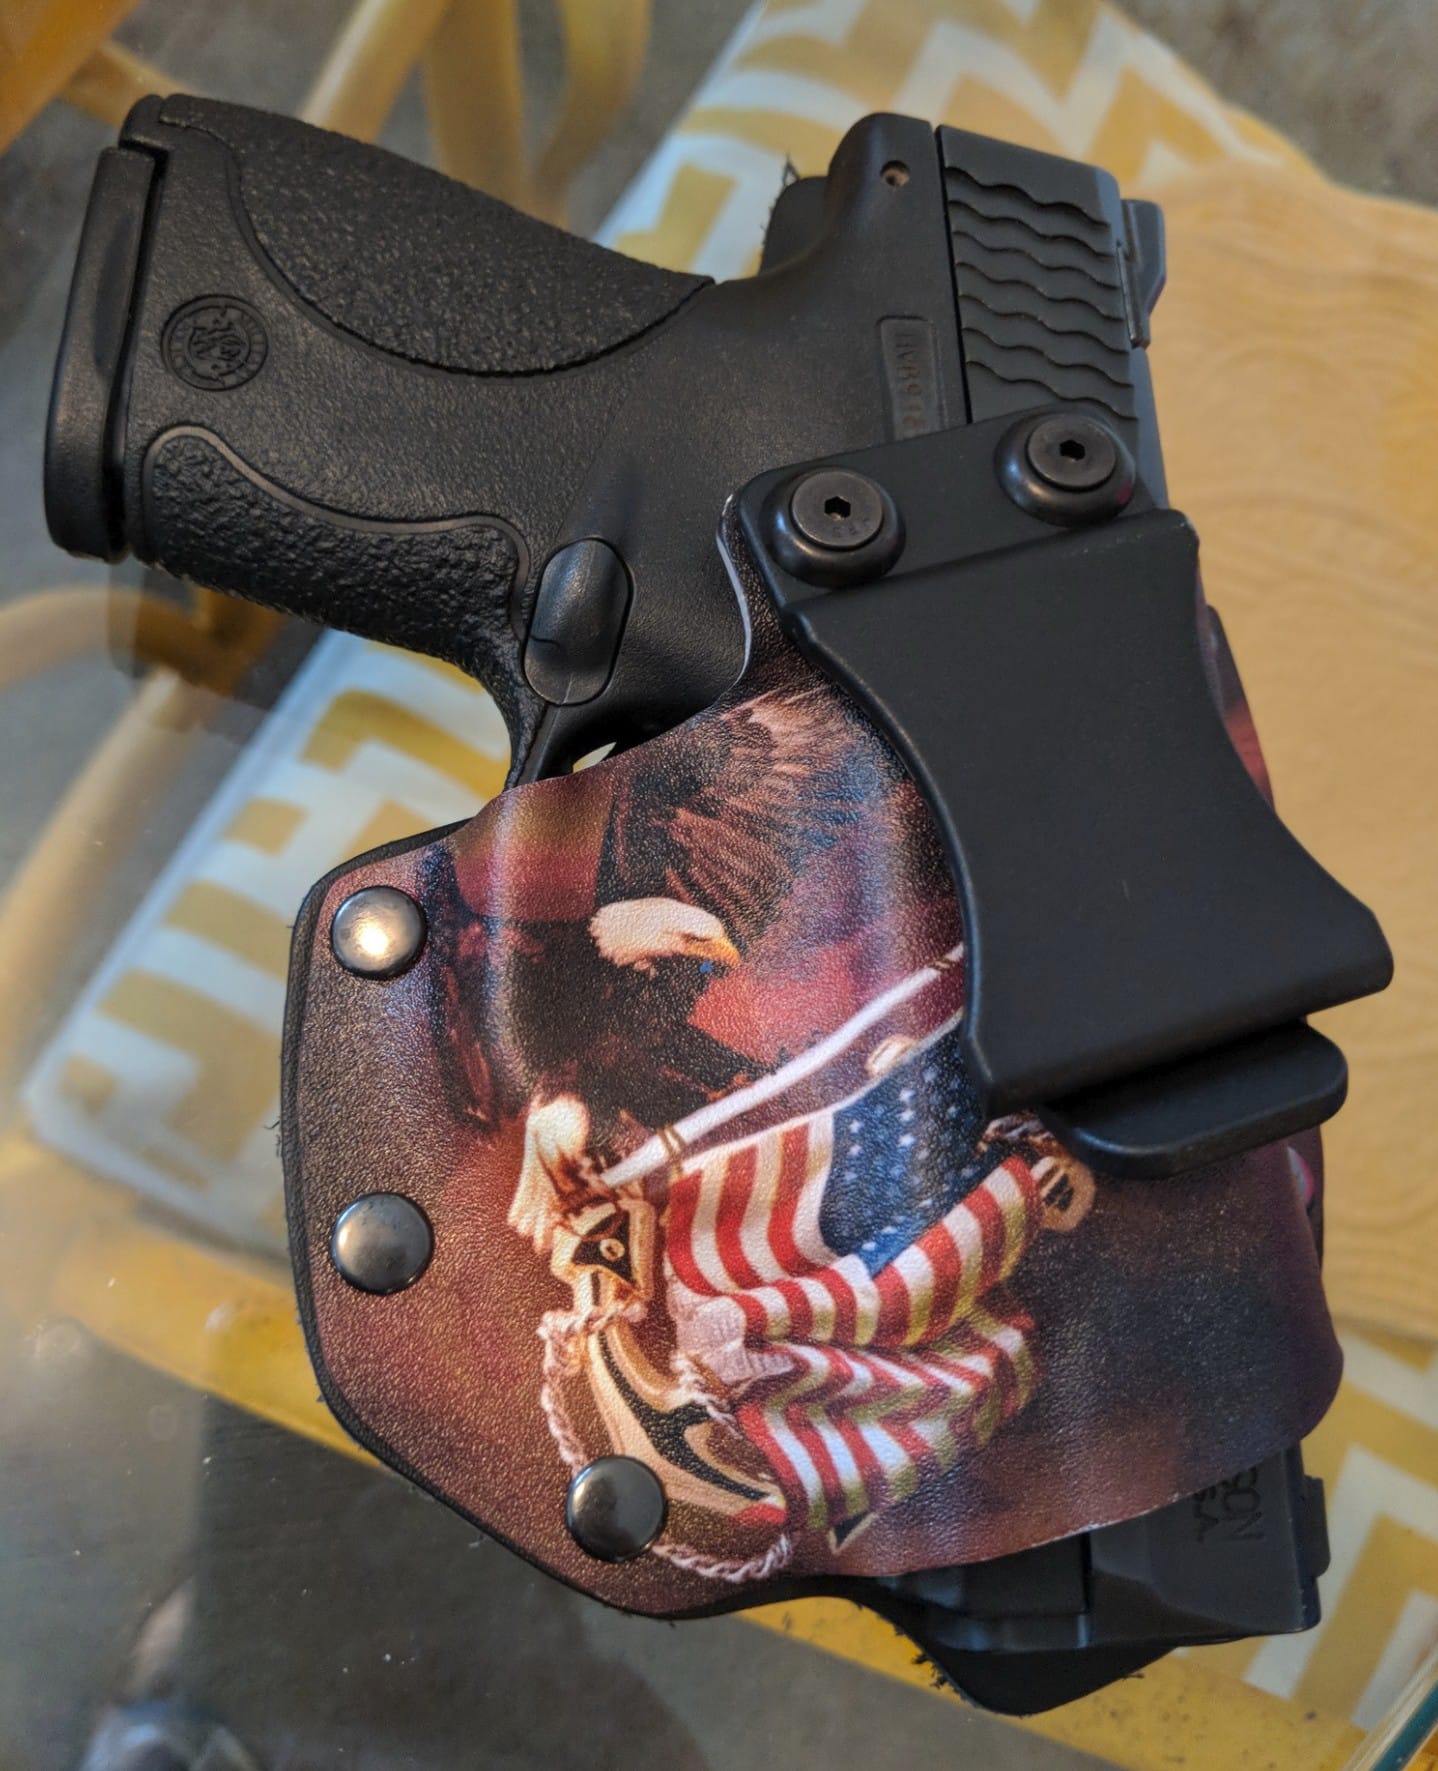 #DIGTHERIG – Brandon and his Smith & Wesson M&P Shield in a Custom “Freedom” Holster